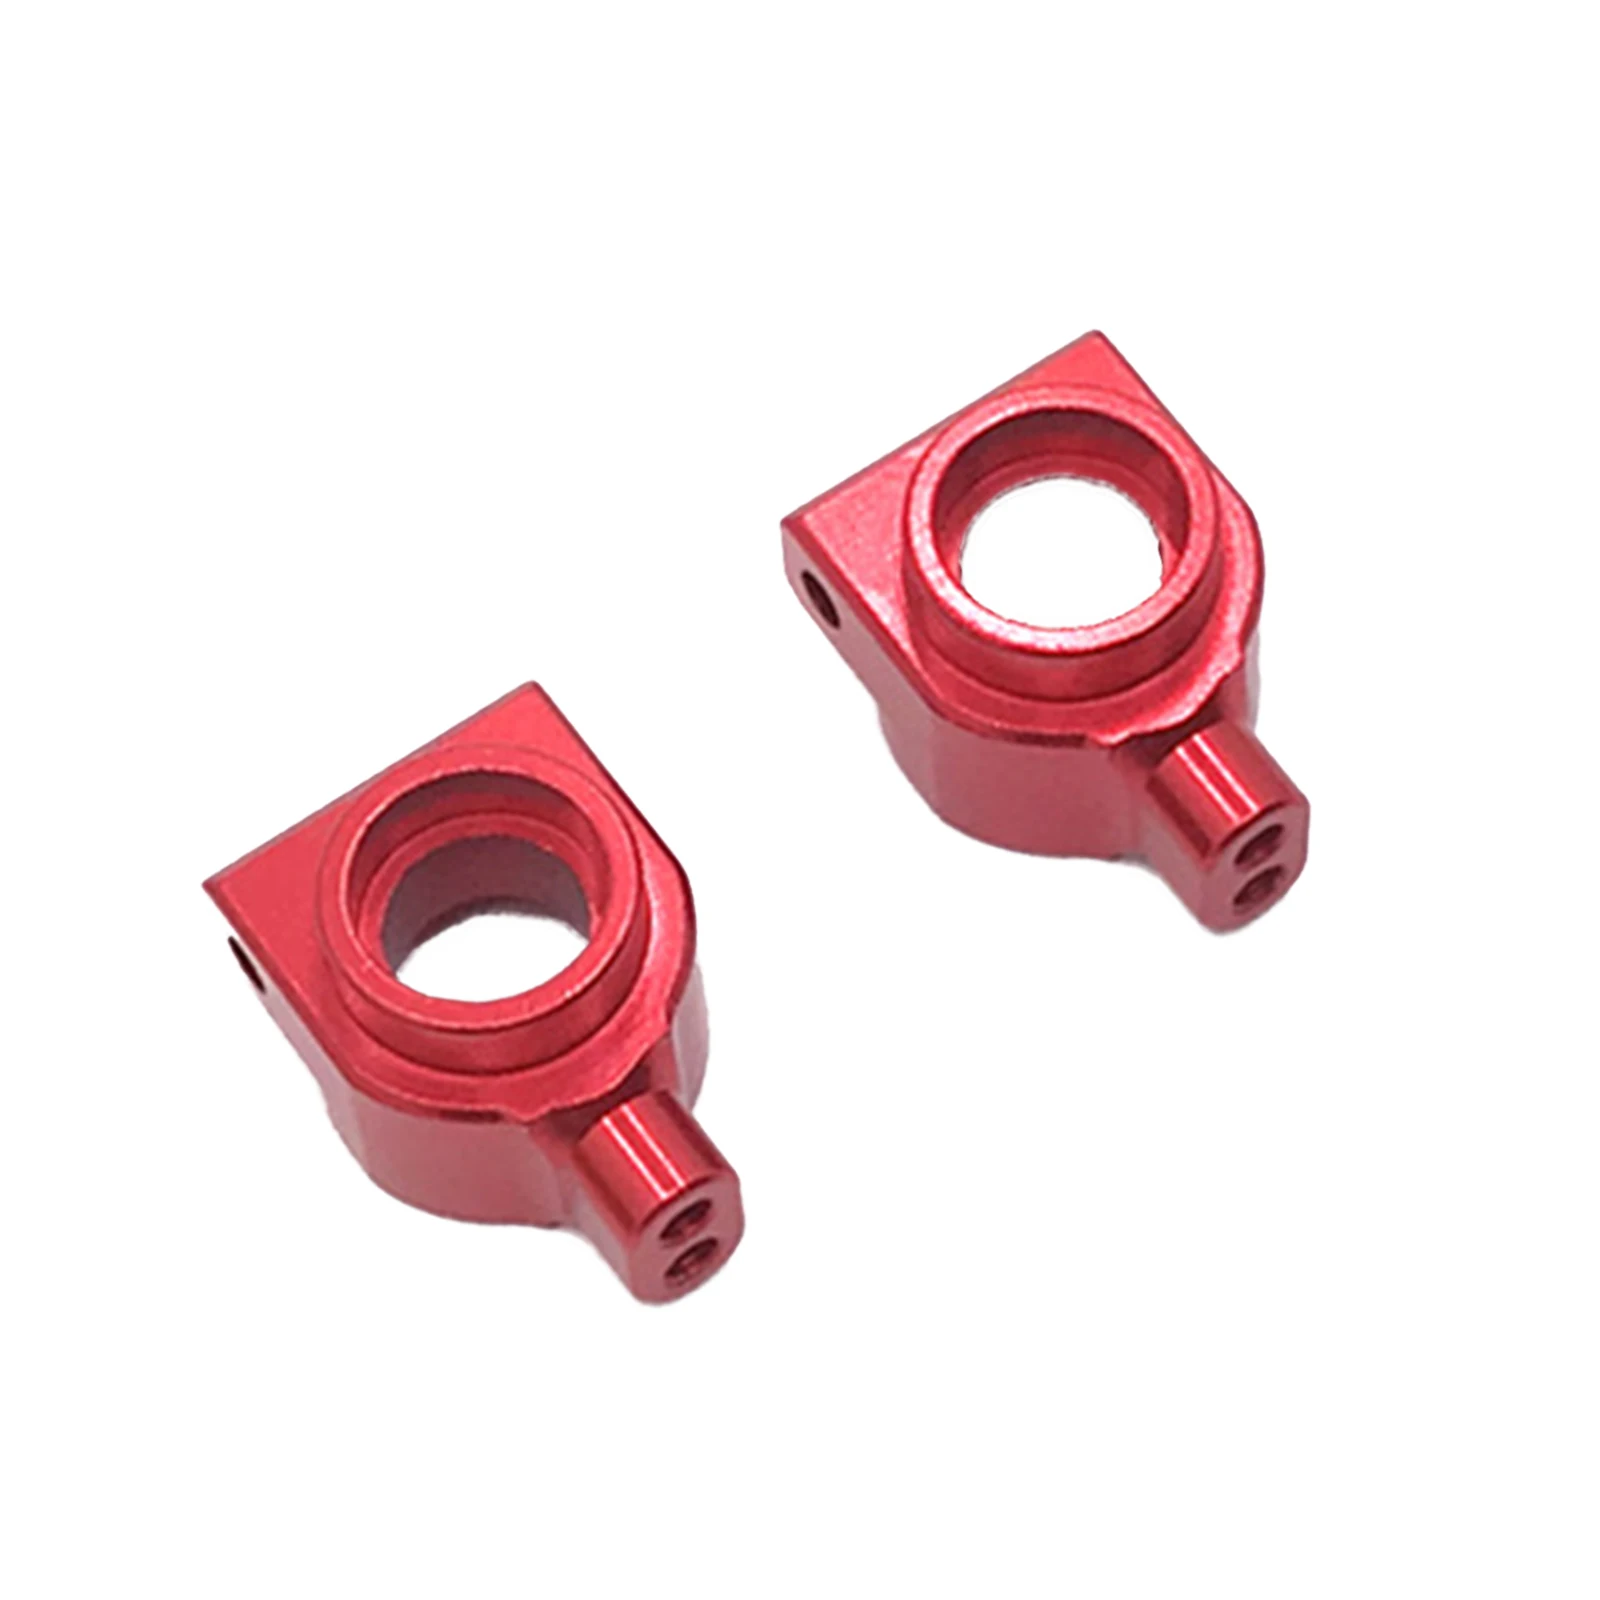 2pcs Alloy RC Rear Wheel Seat Cup for WLtoys 104001 1/10 Scale RC Off-road Buggy Cars